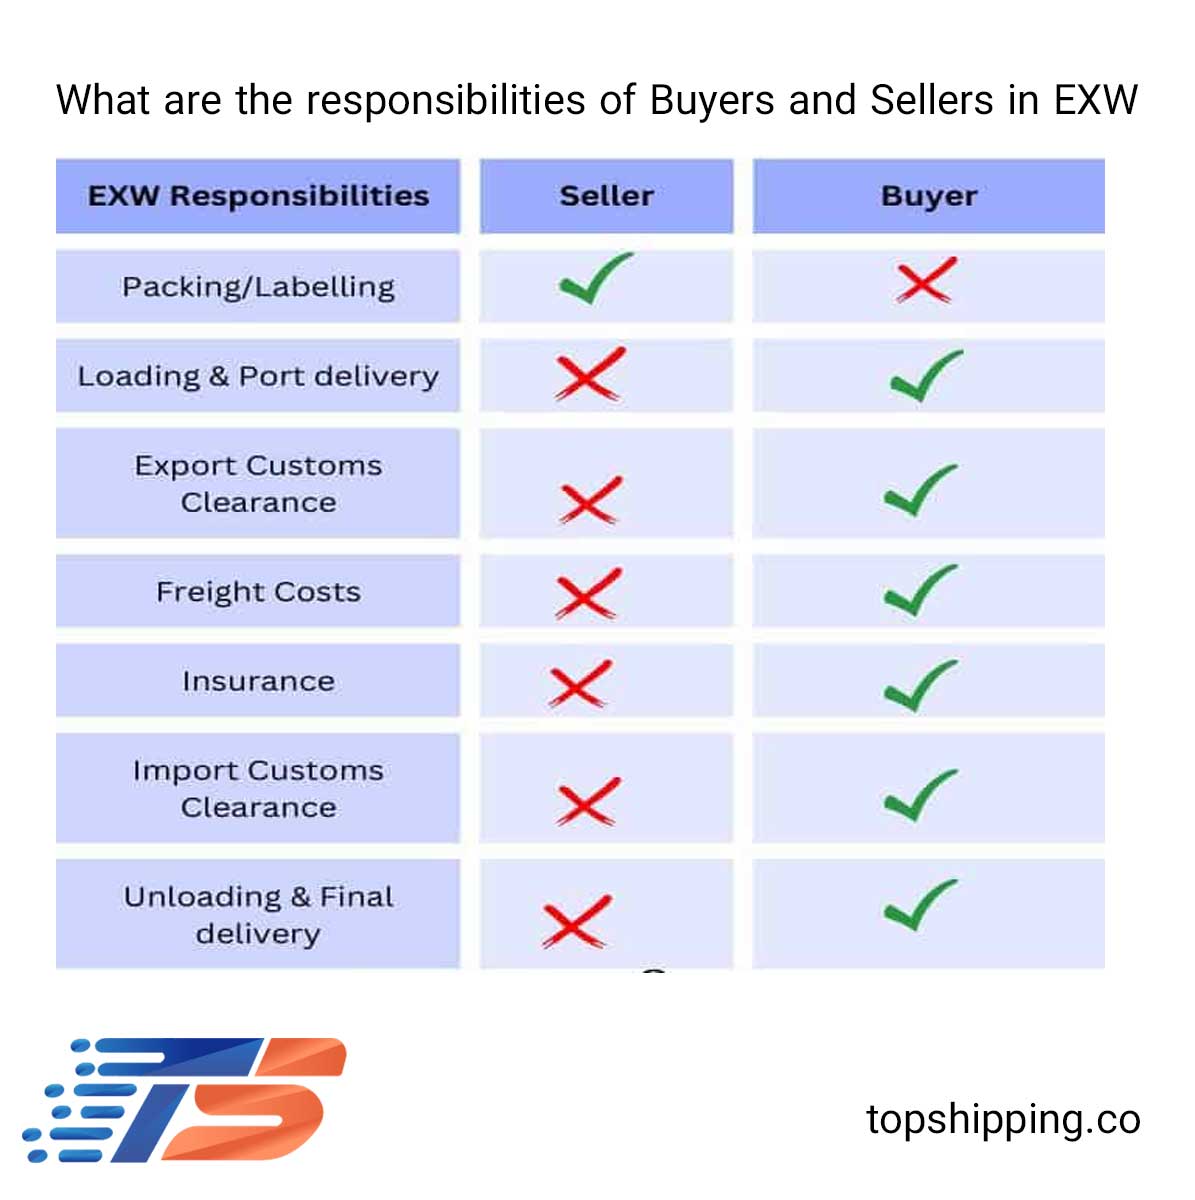 What are the responsibilities of Buyers and Sellers in EXW? 